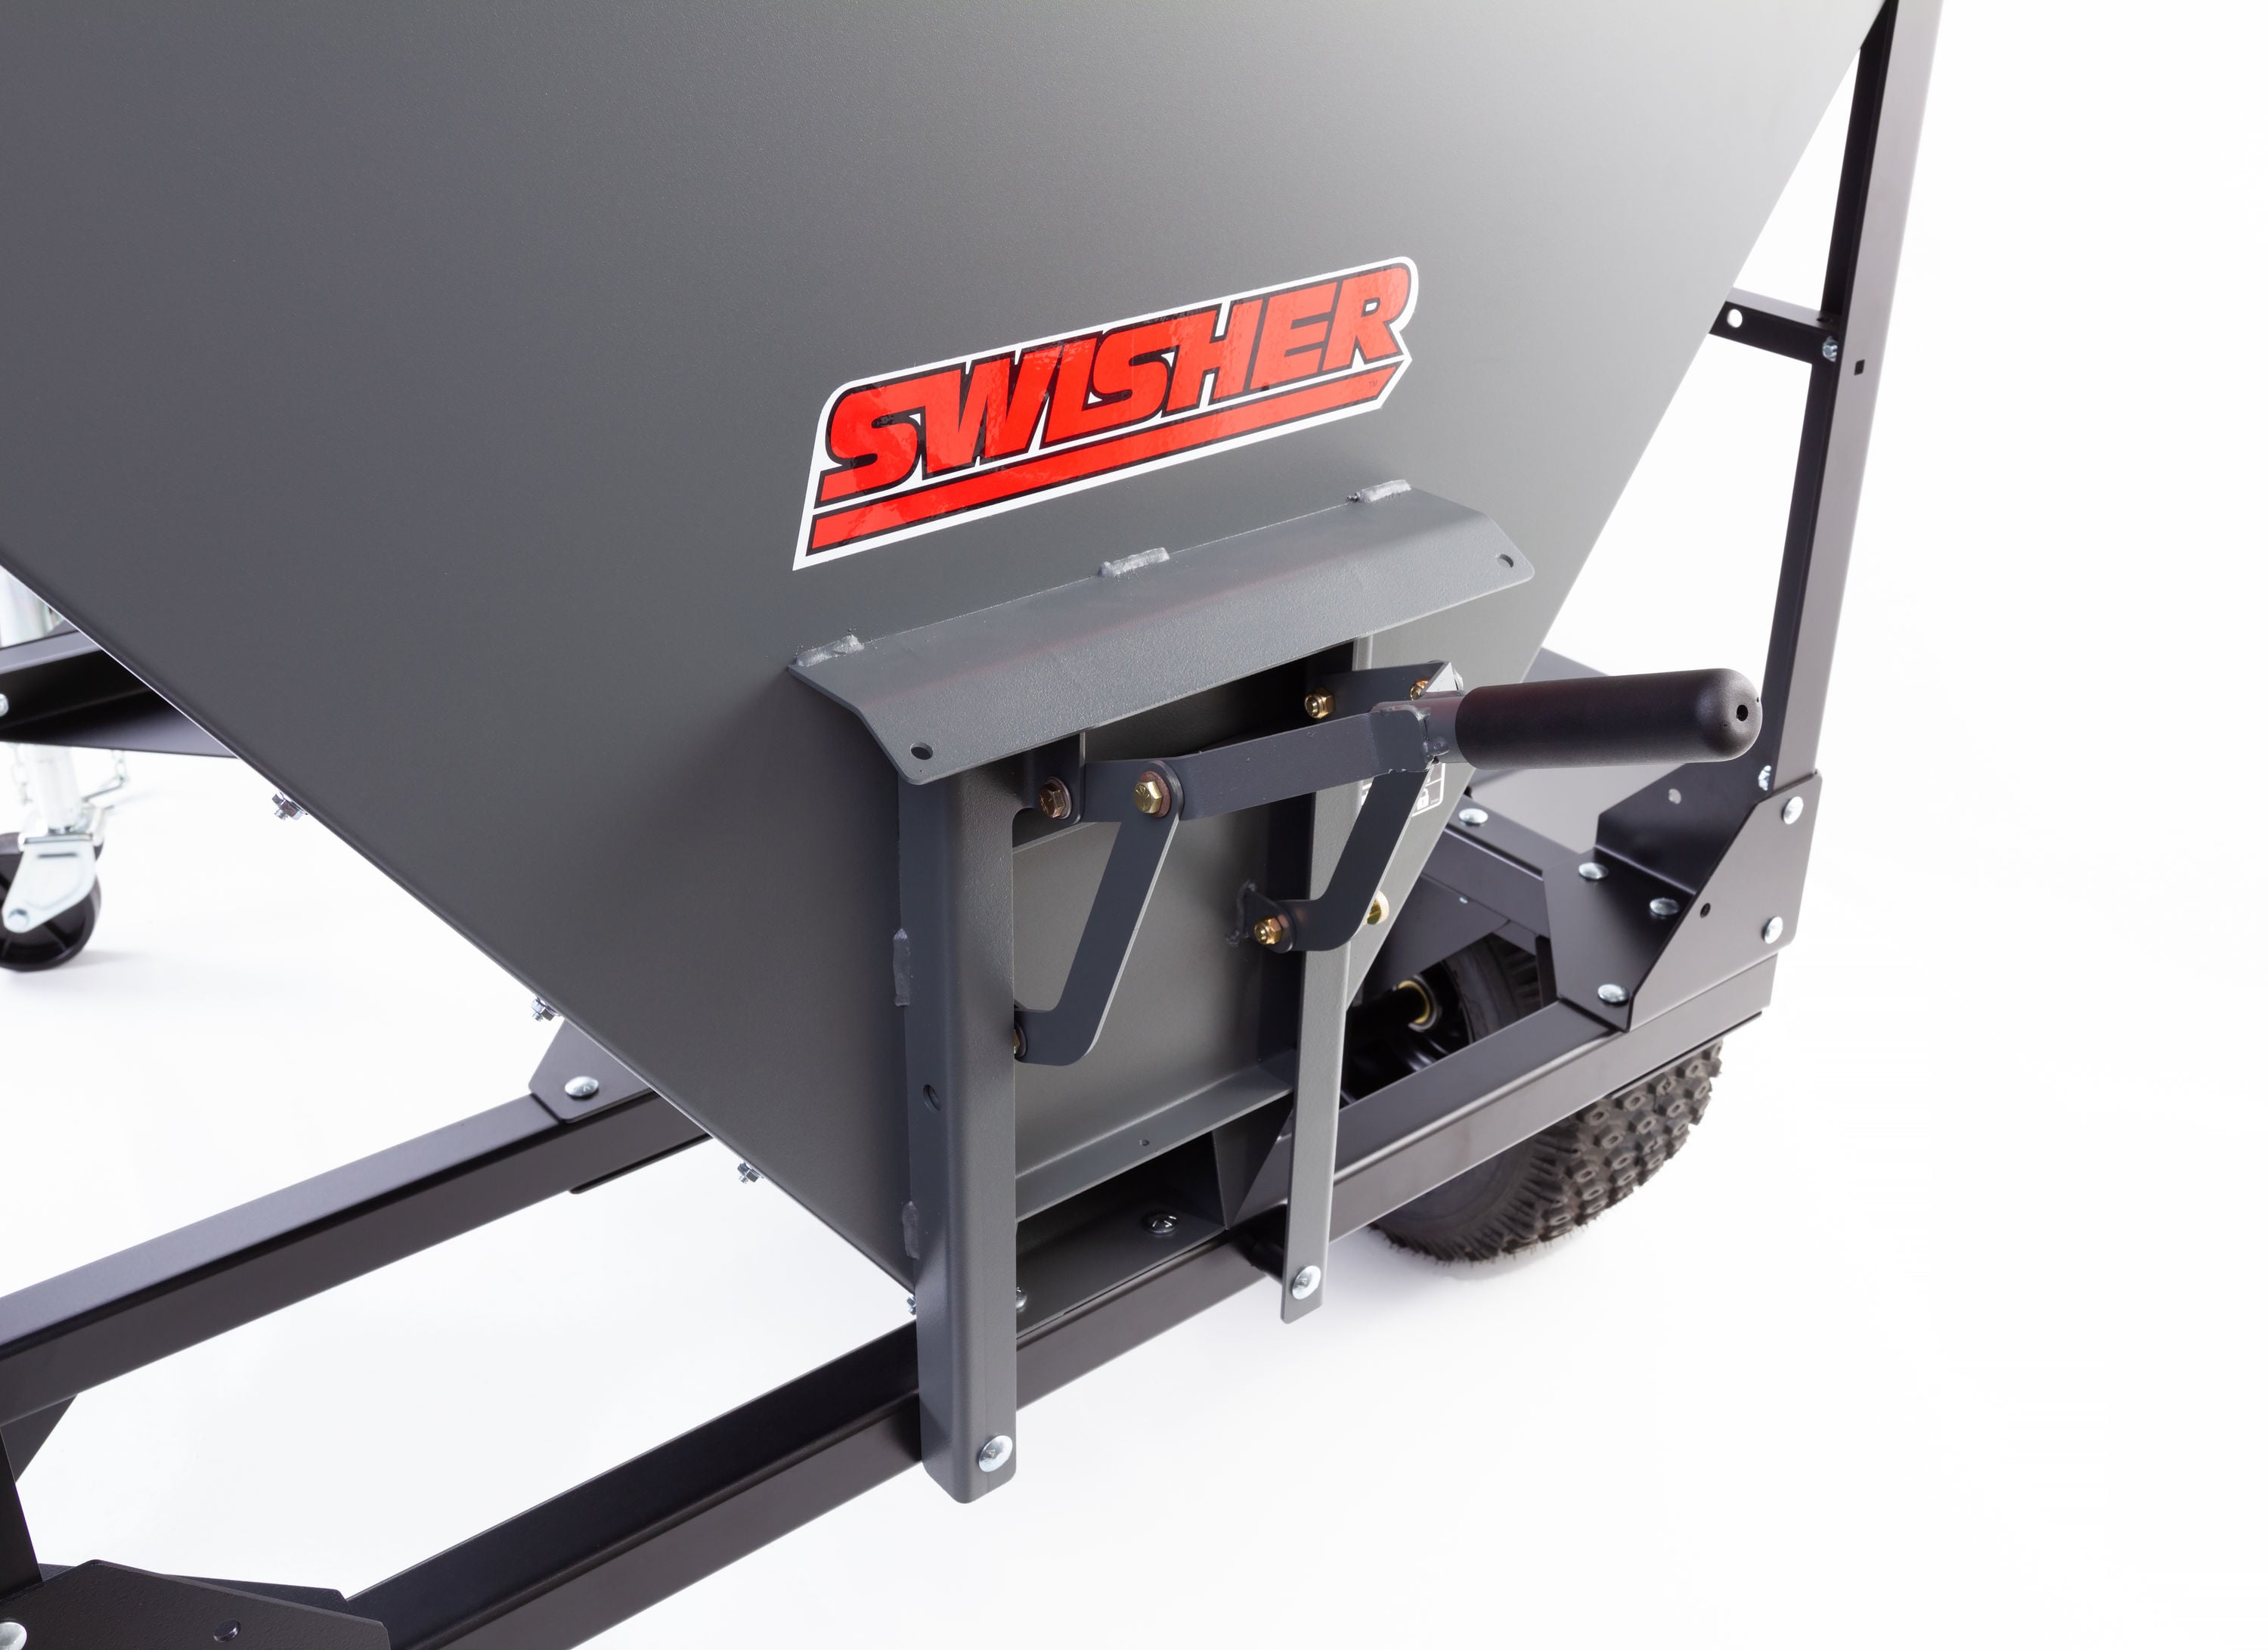 Swisher Oven and Grill Cleaner